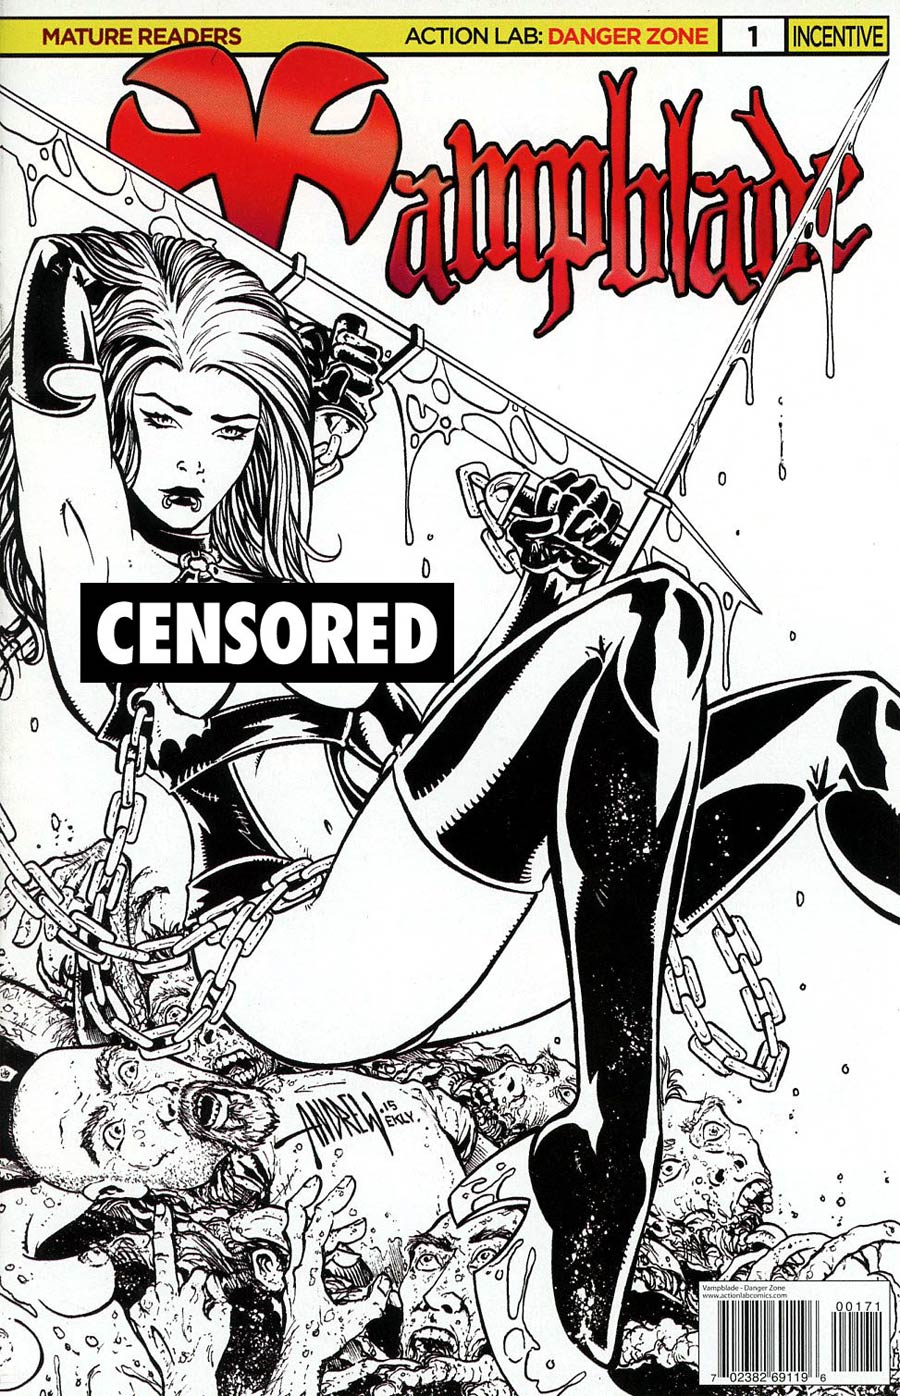 Vampblade #1 Cover G Incentive Andrew Mangum 90s Cheesecake Risque Black & White Cover